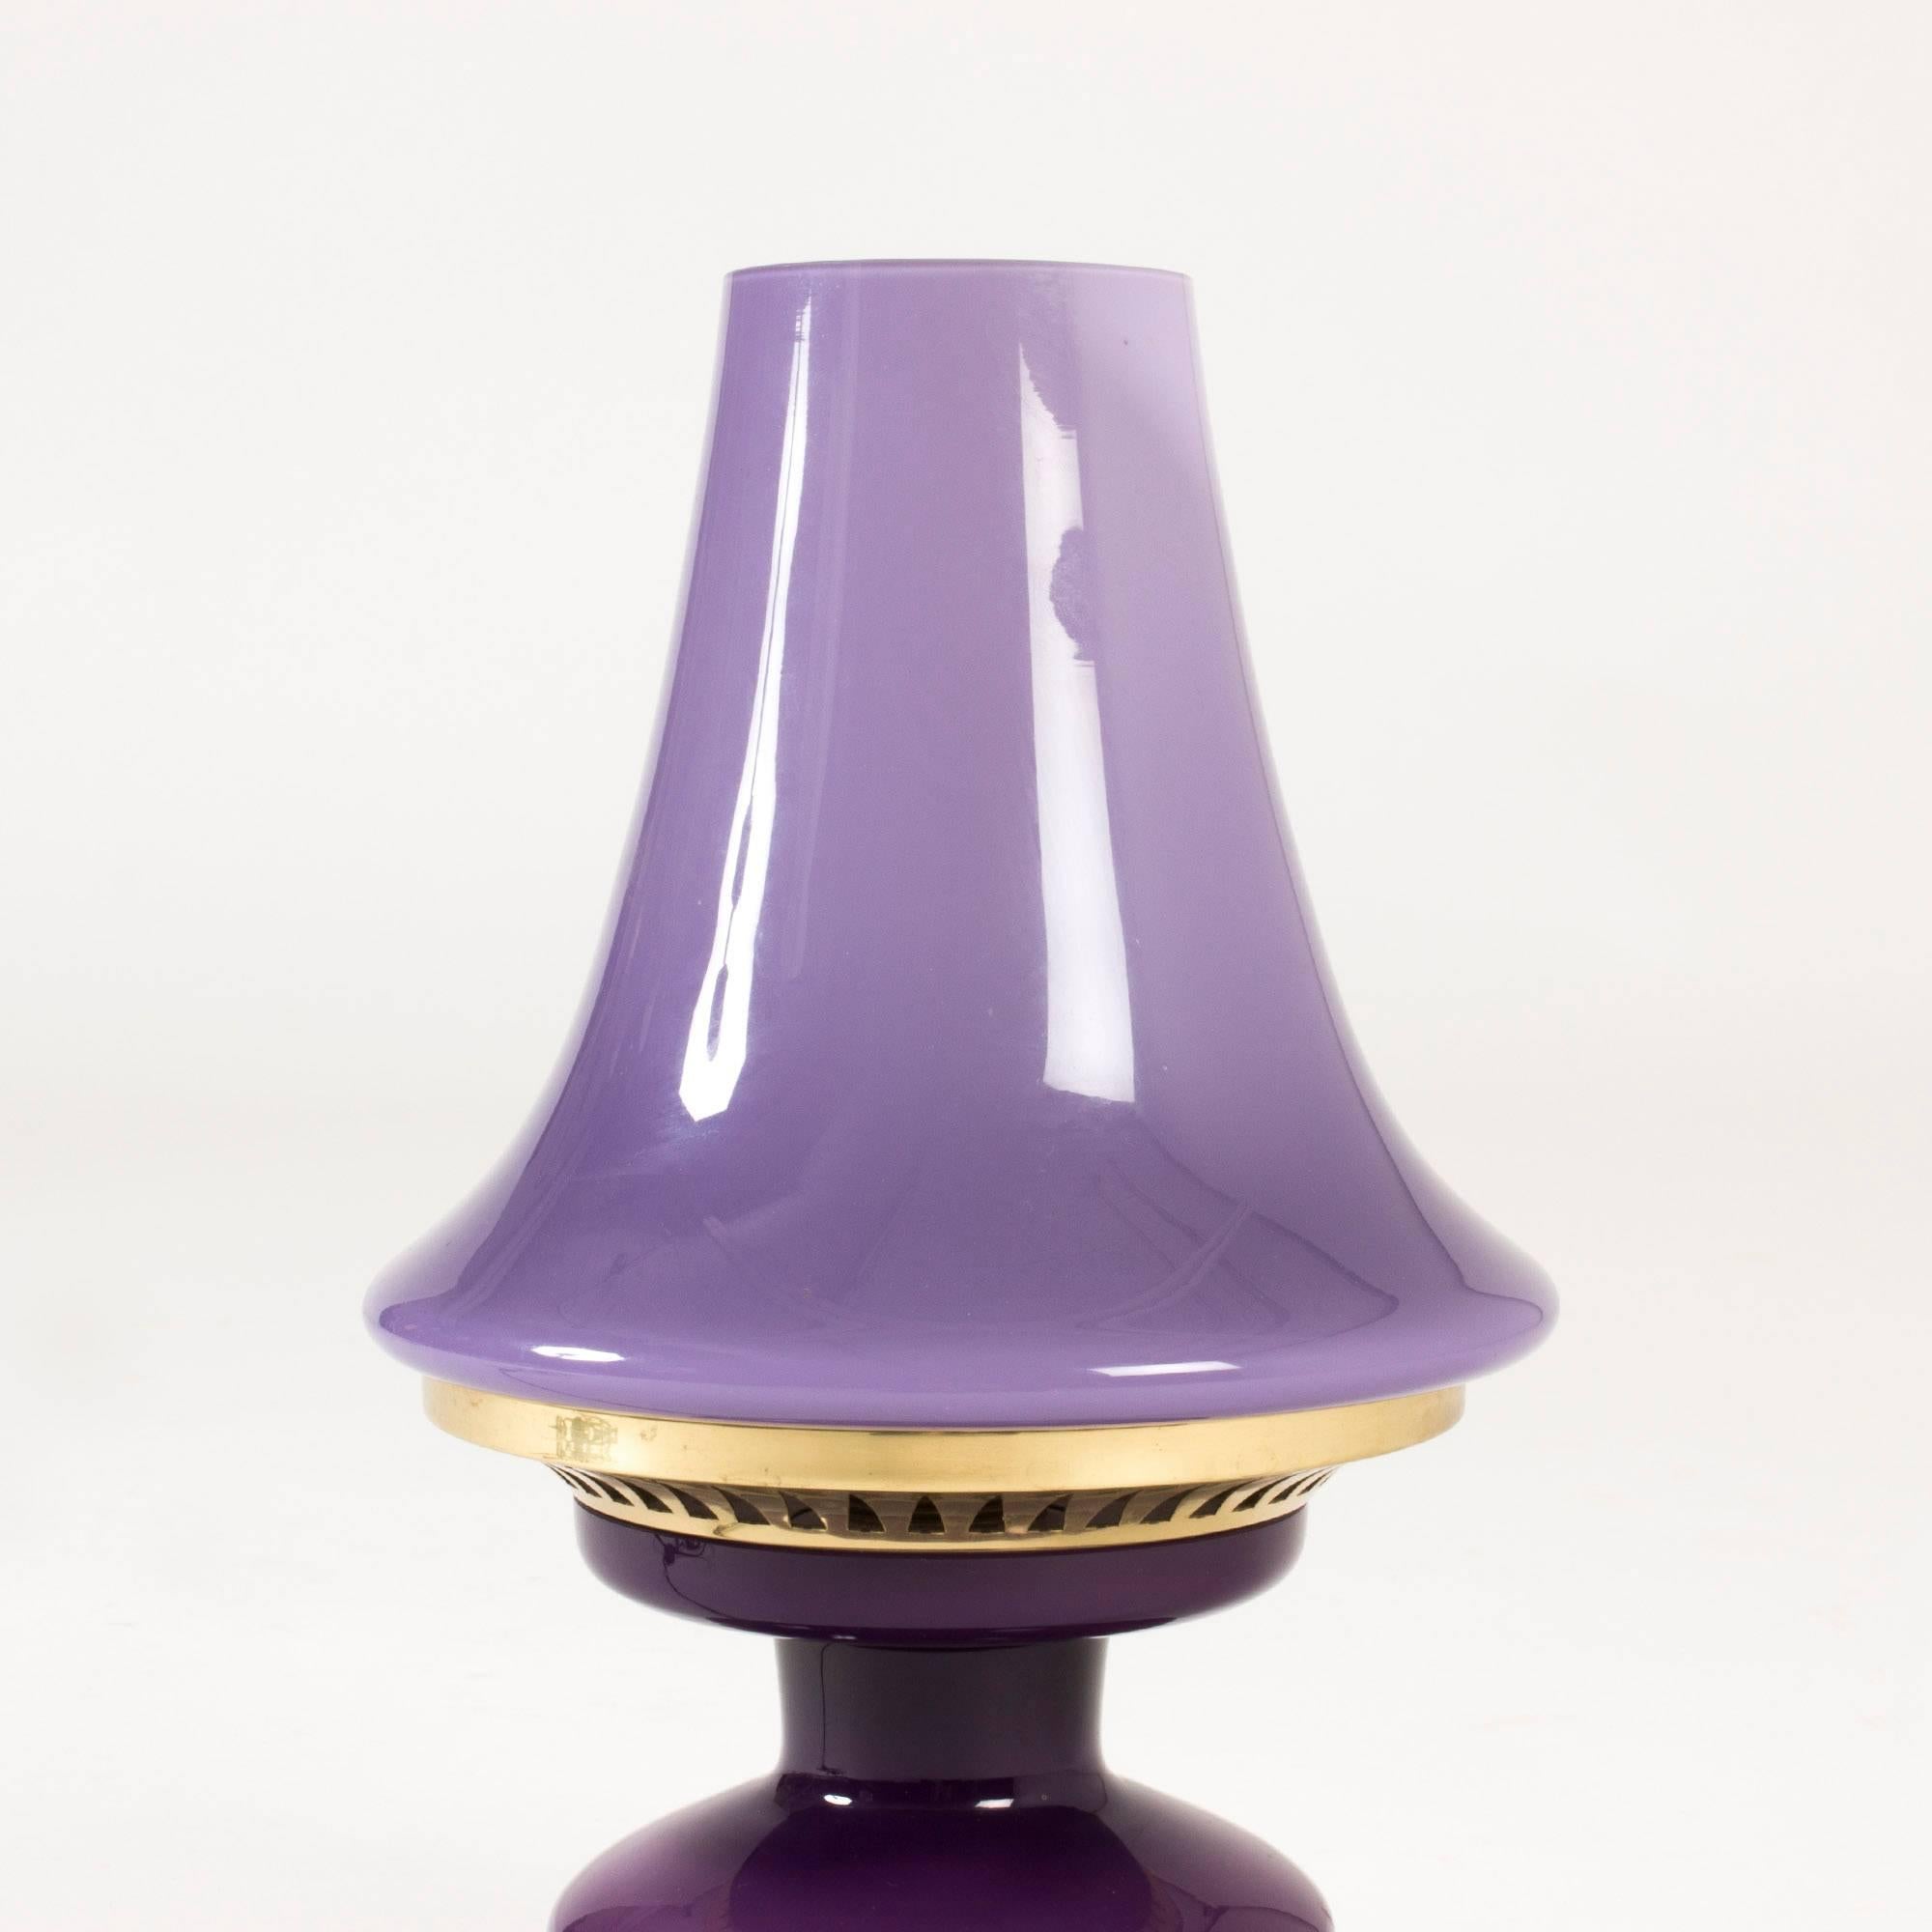 Adorable purple table lamp by Hans-Agne Jakobsson, made from opaline glass and brass, perforated in a graphic pattern. Gives a beautiful mood light when lit.